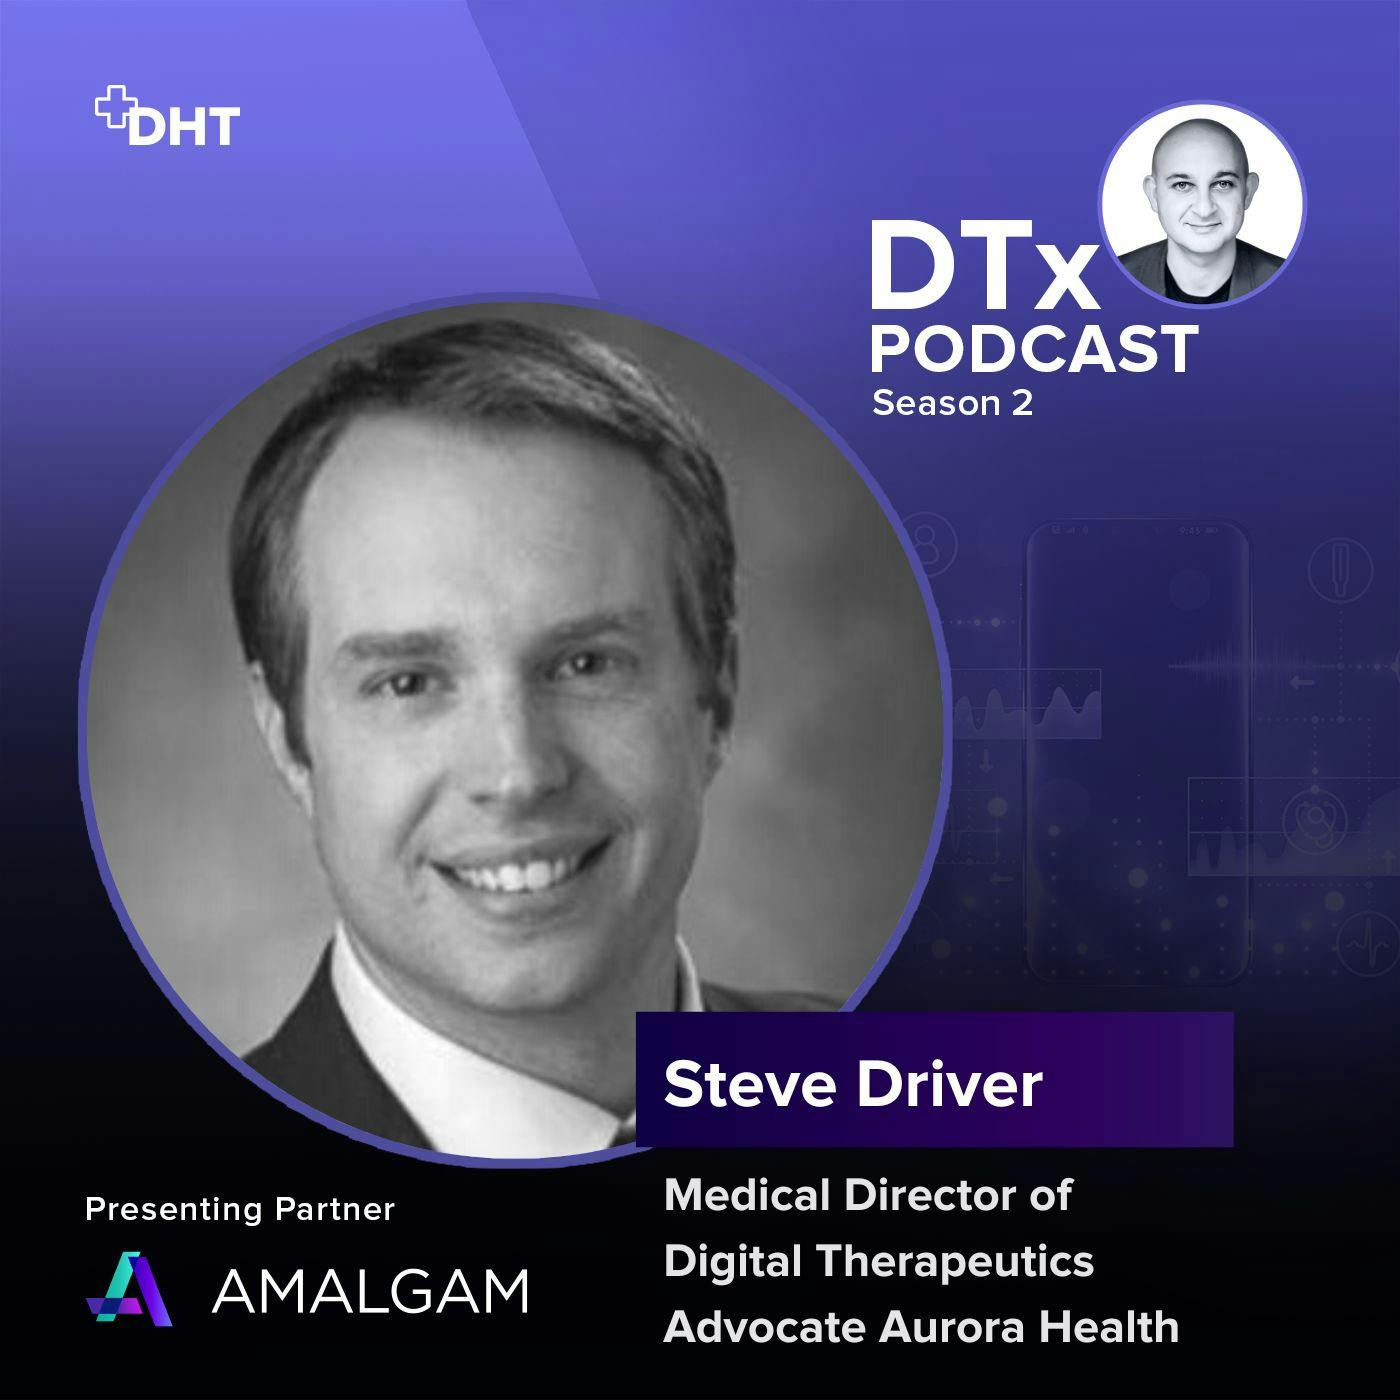 A Health System View of DTx: Steve Driver shares Insights on his Experience as a Medical Director of Digital Therapeutics